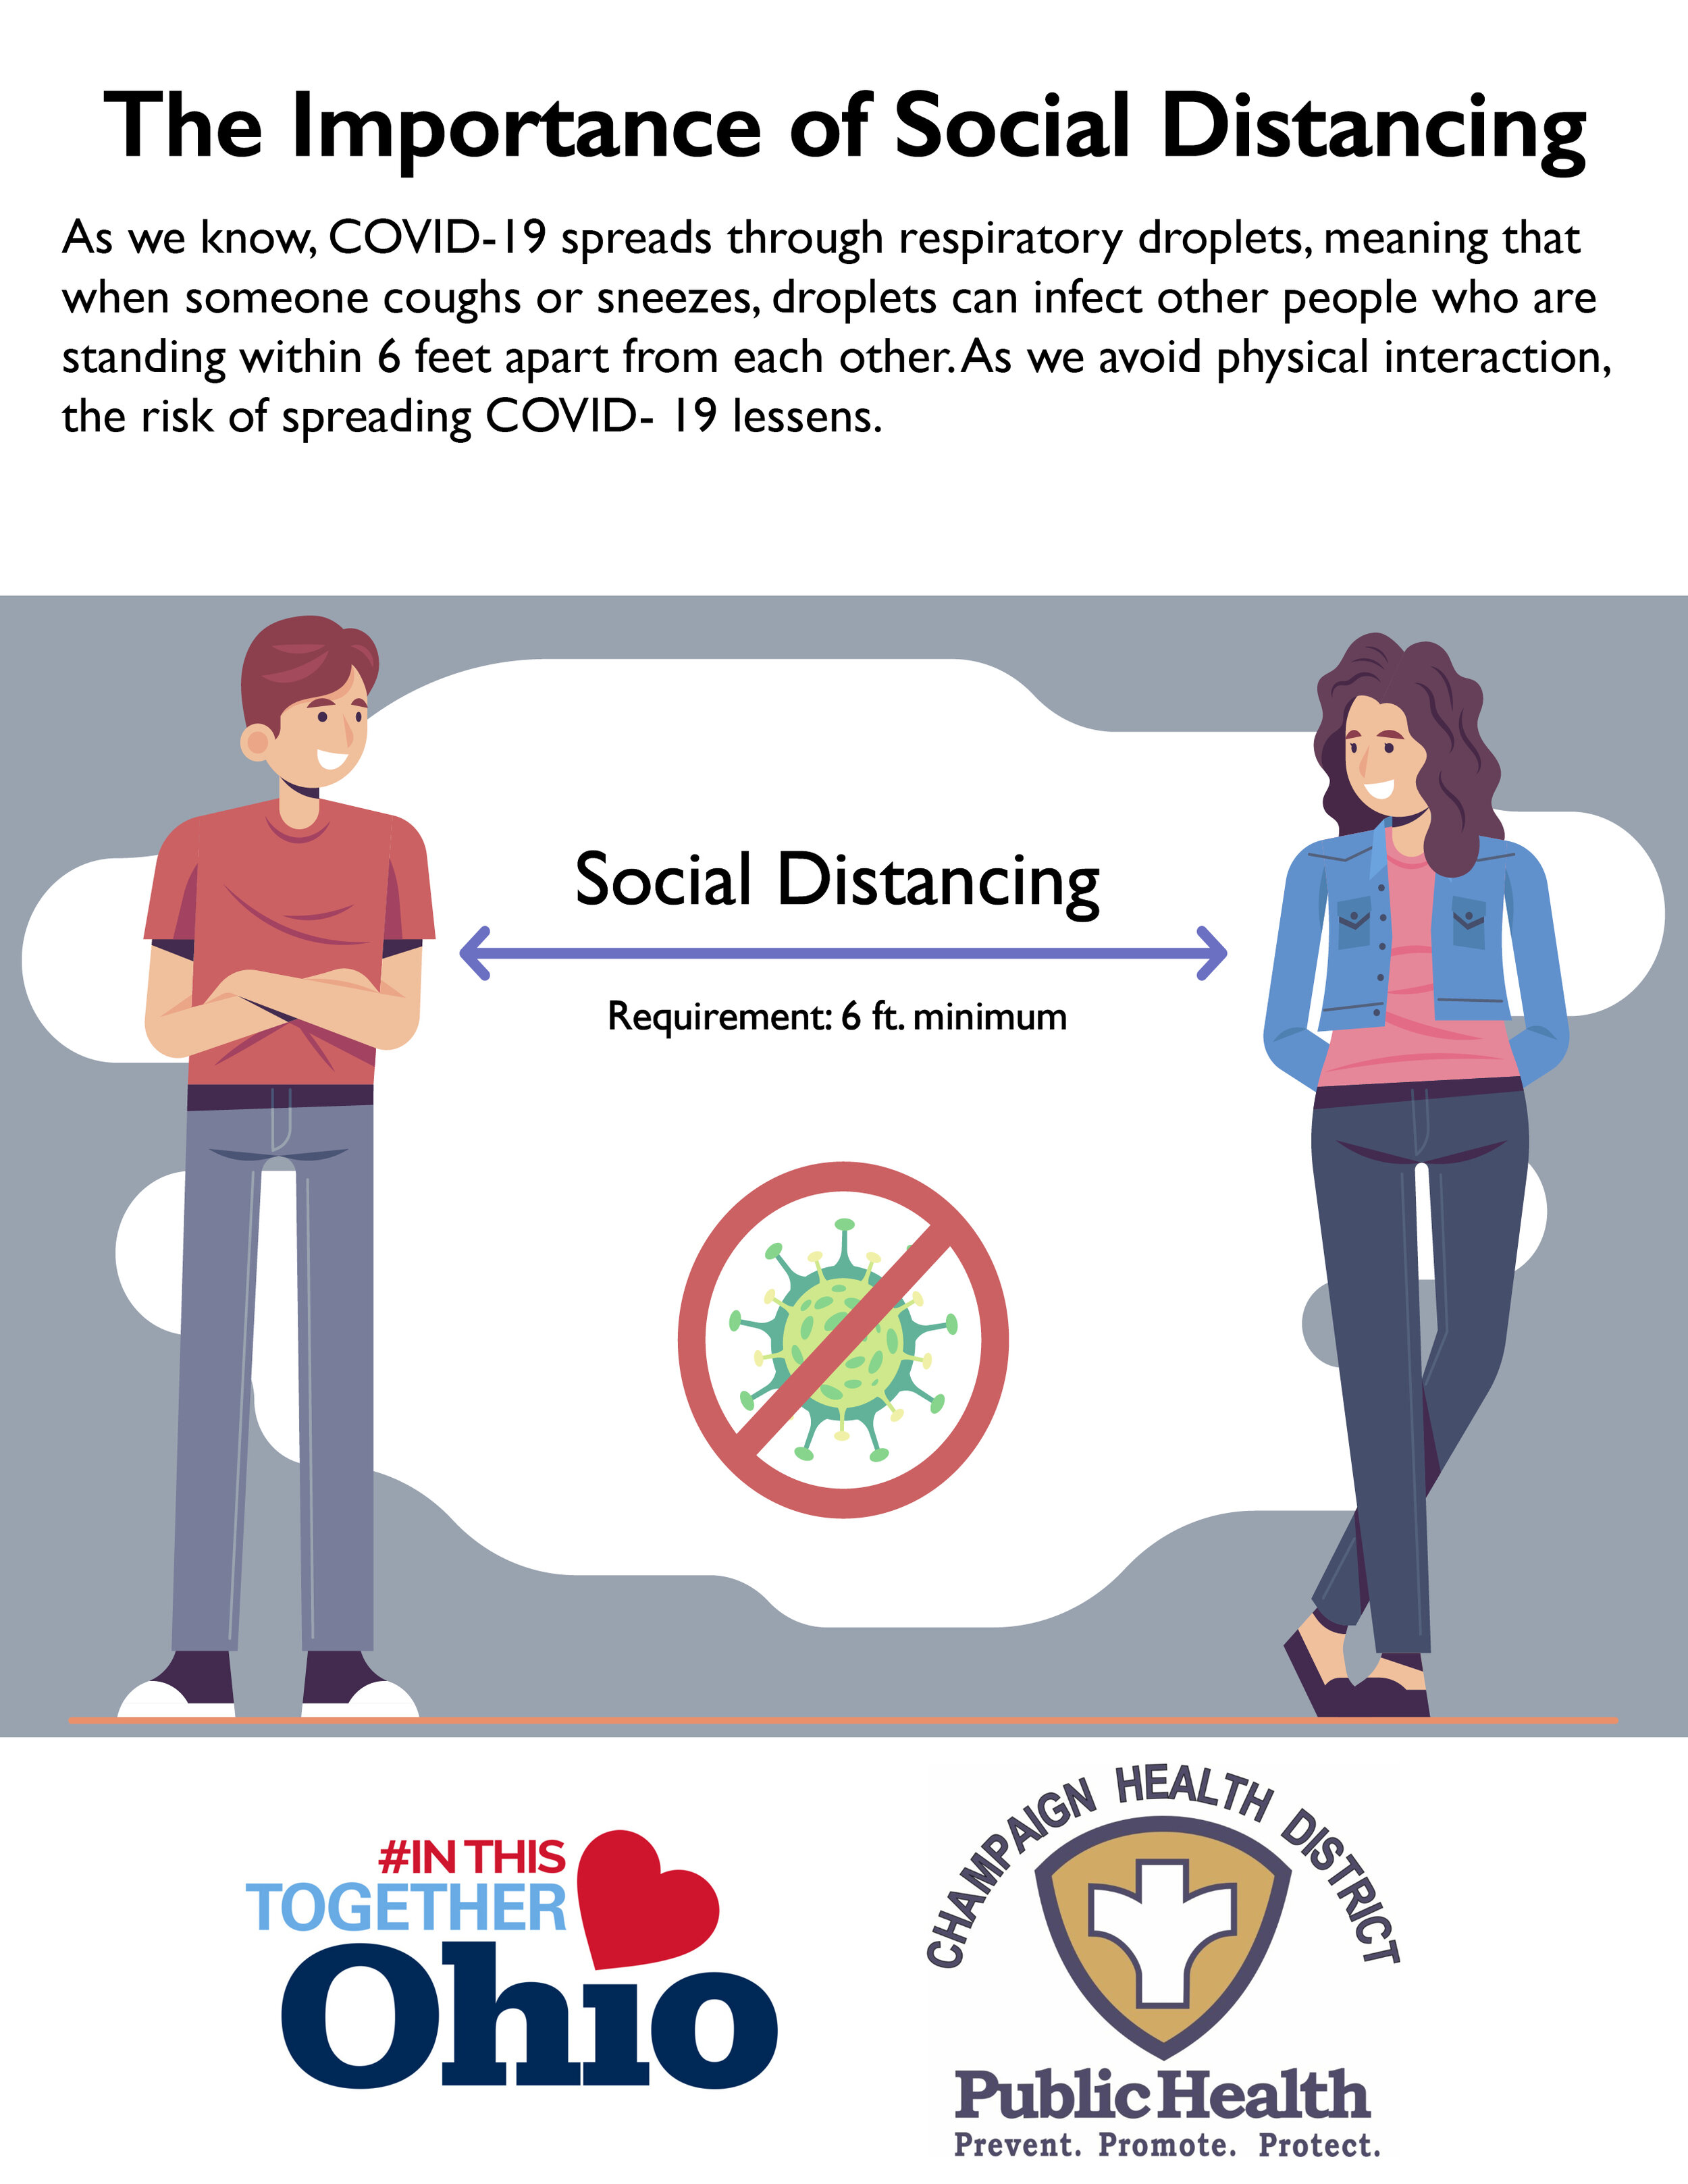 What is Social Distancing